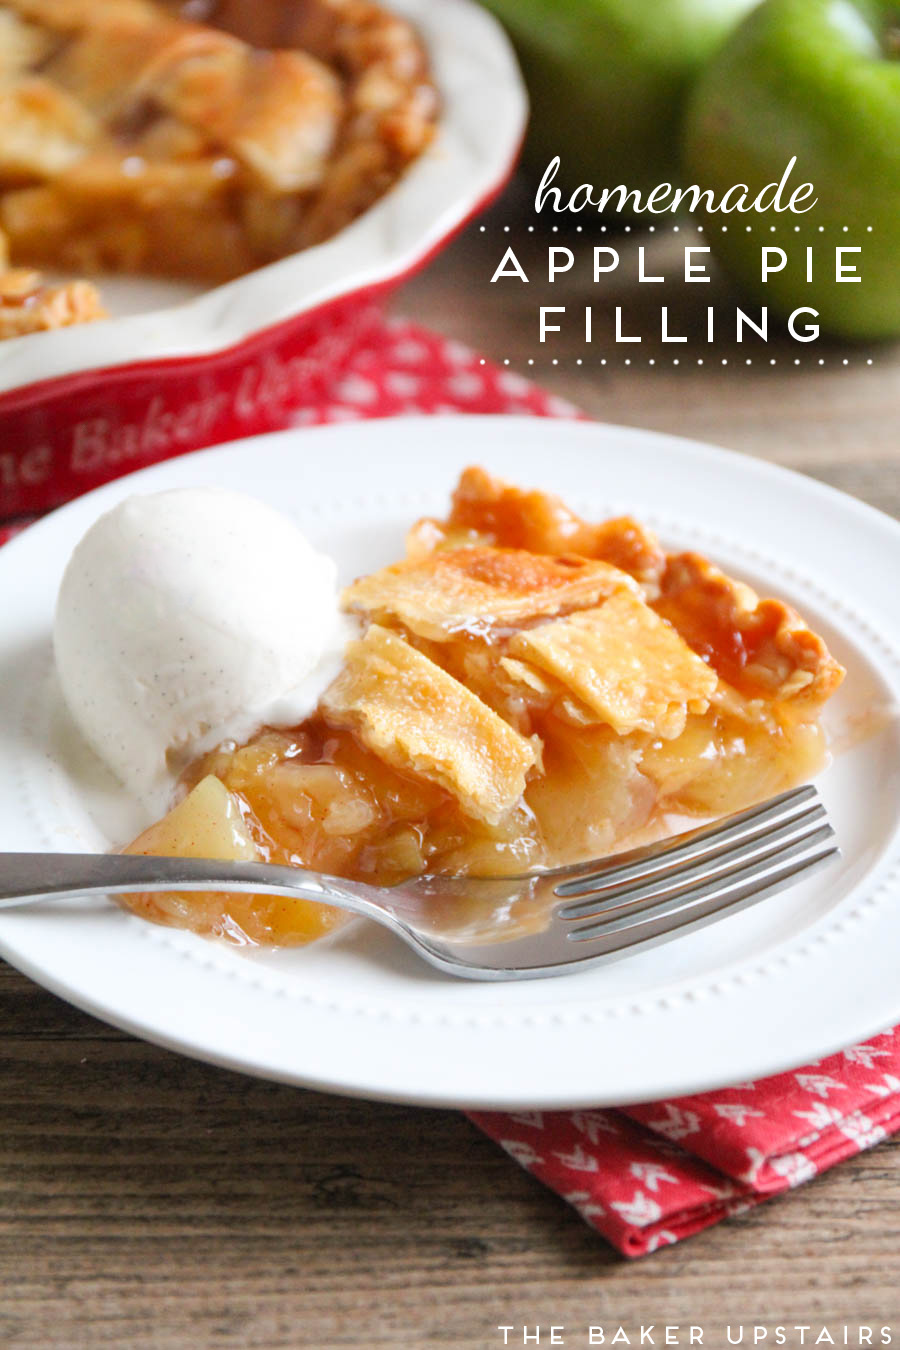 Homemade apple pie filling! So delicious and flavorful, and makes the best pie ever!